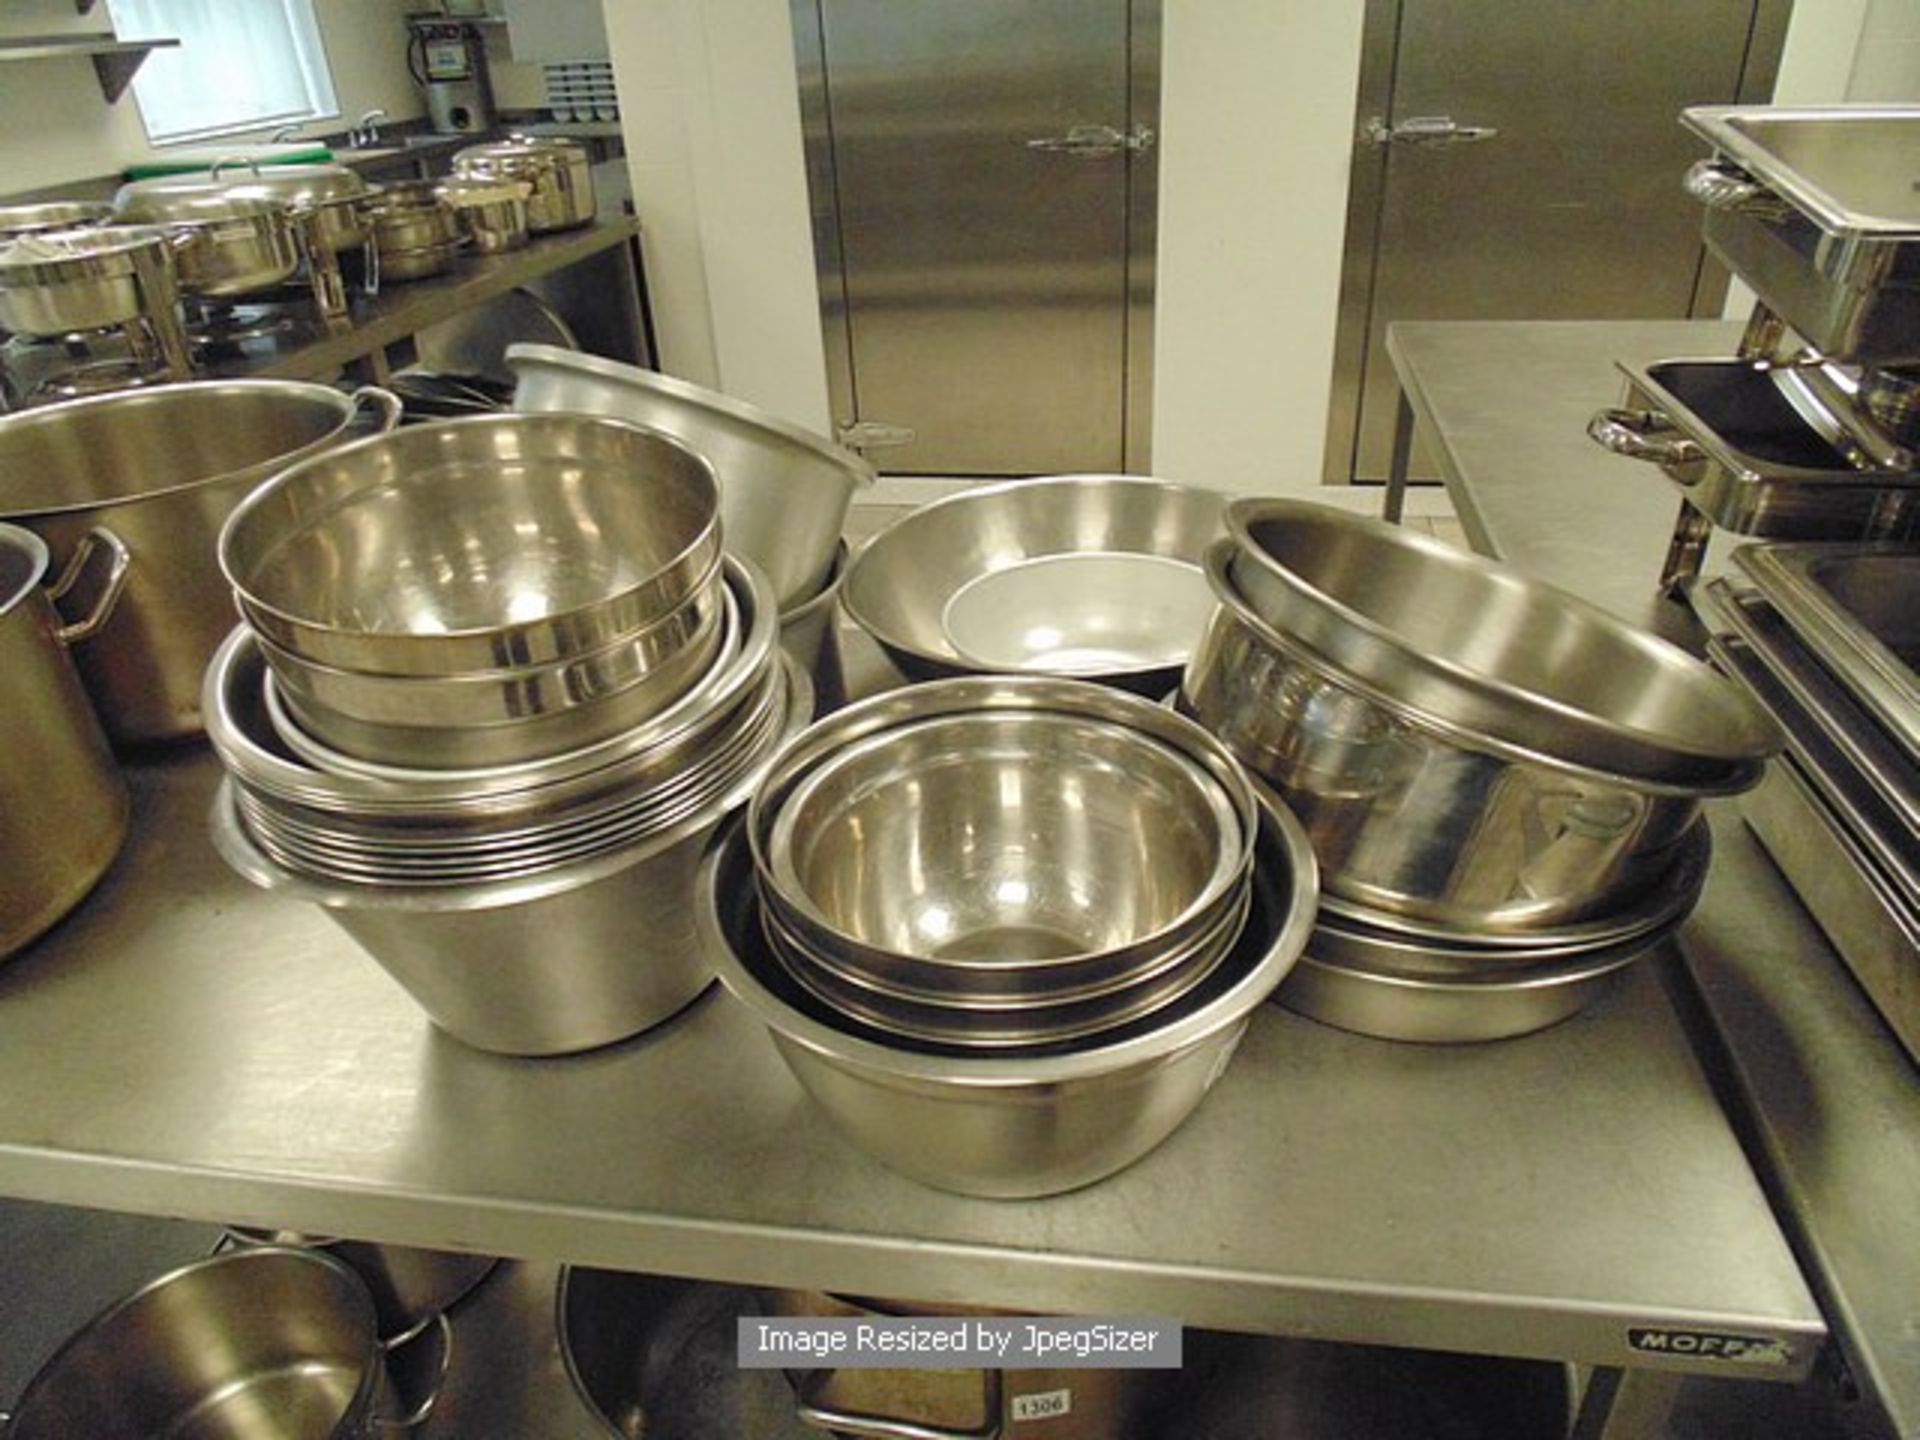 Large quantity of various mixing bowls as found